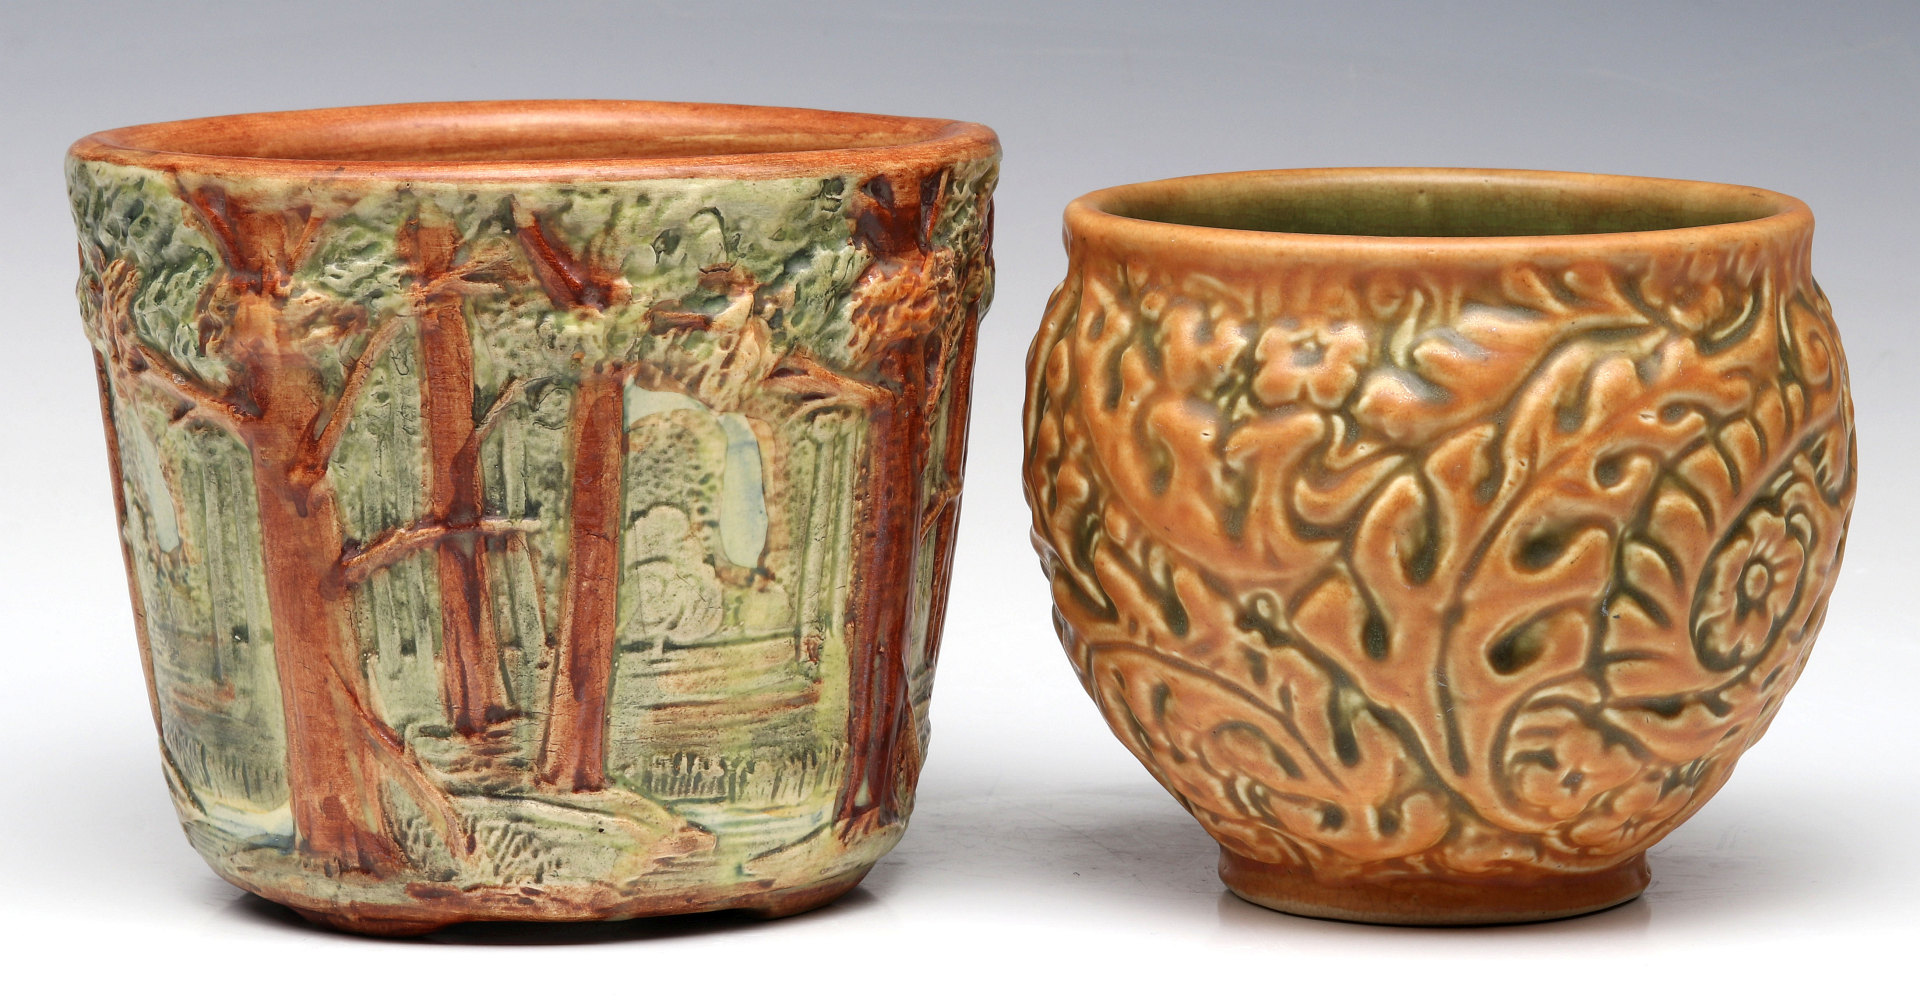 WELLER 'FOREST' AND 'MARVO' POTTERY JARDINIERES